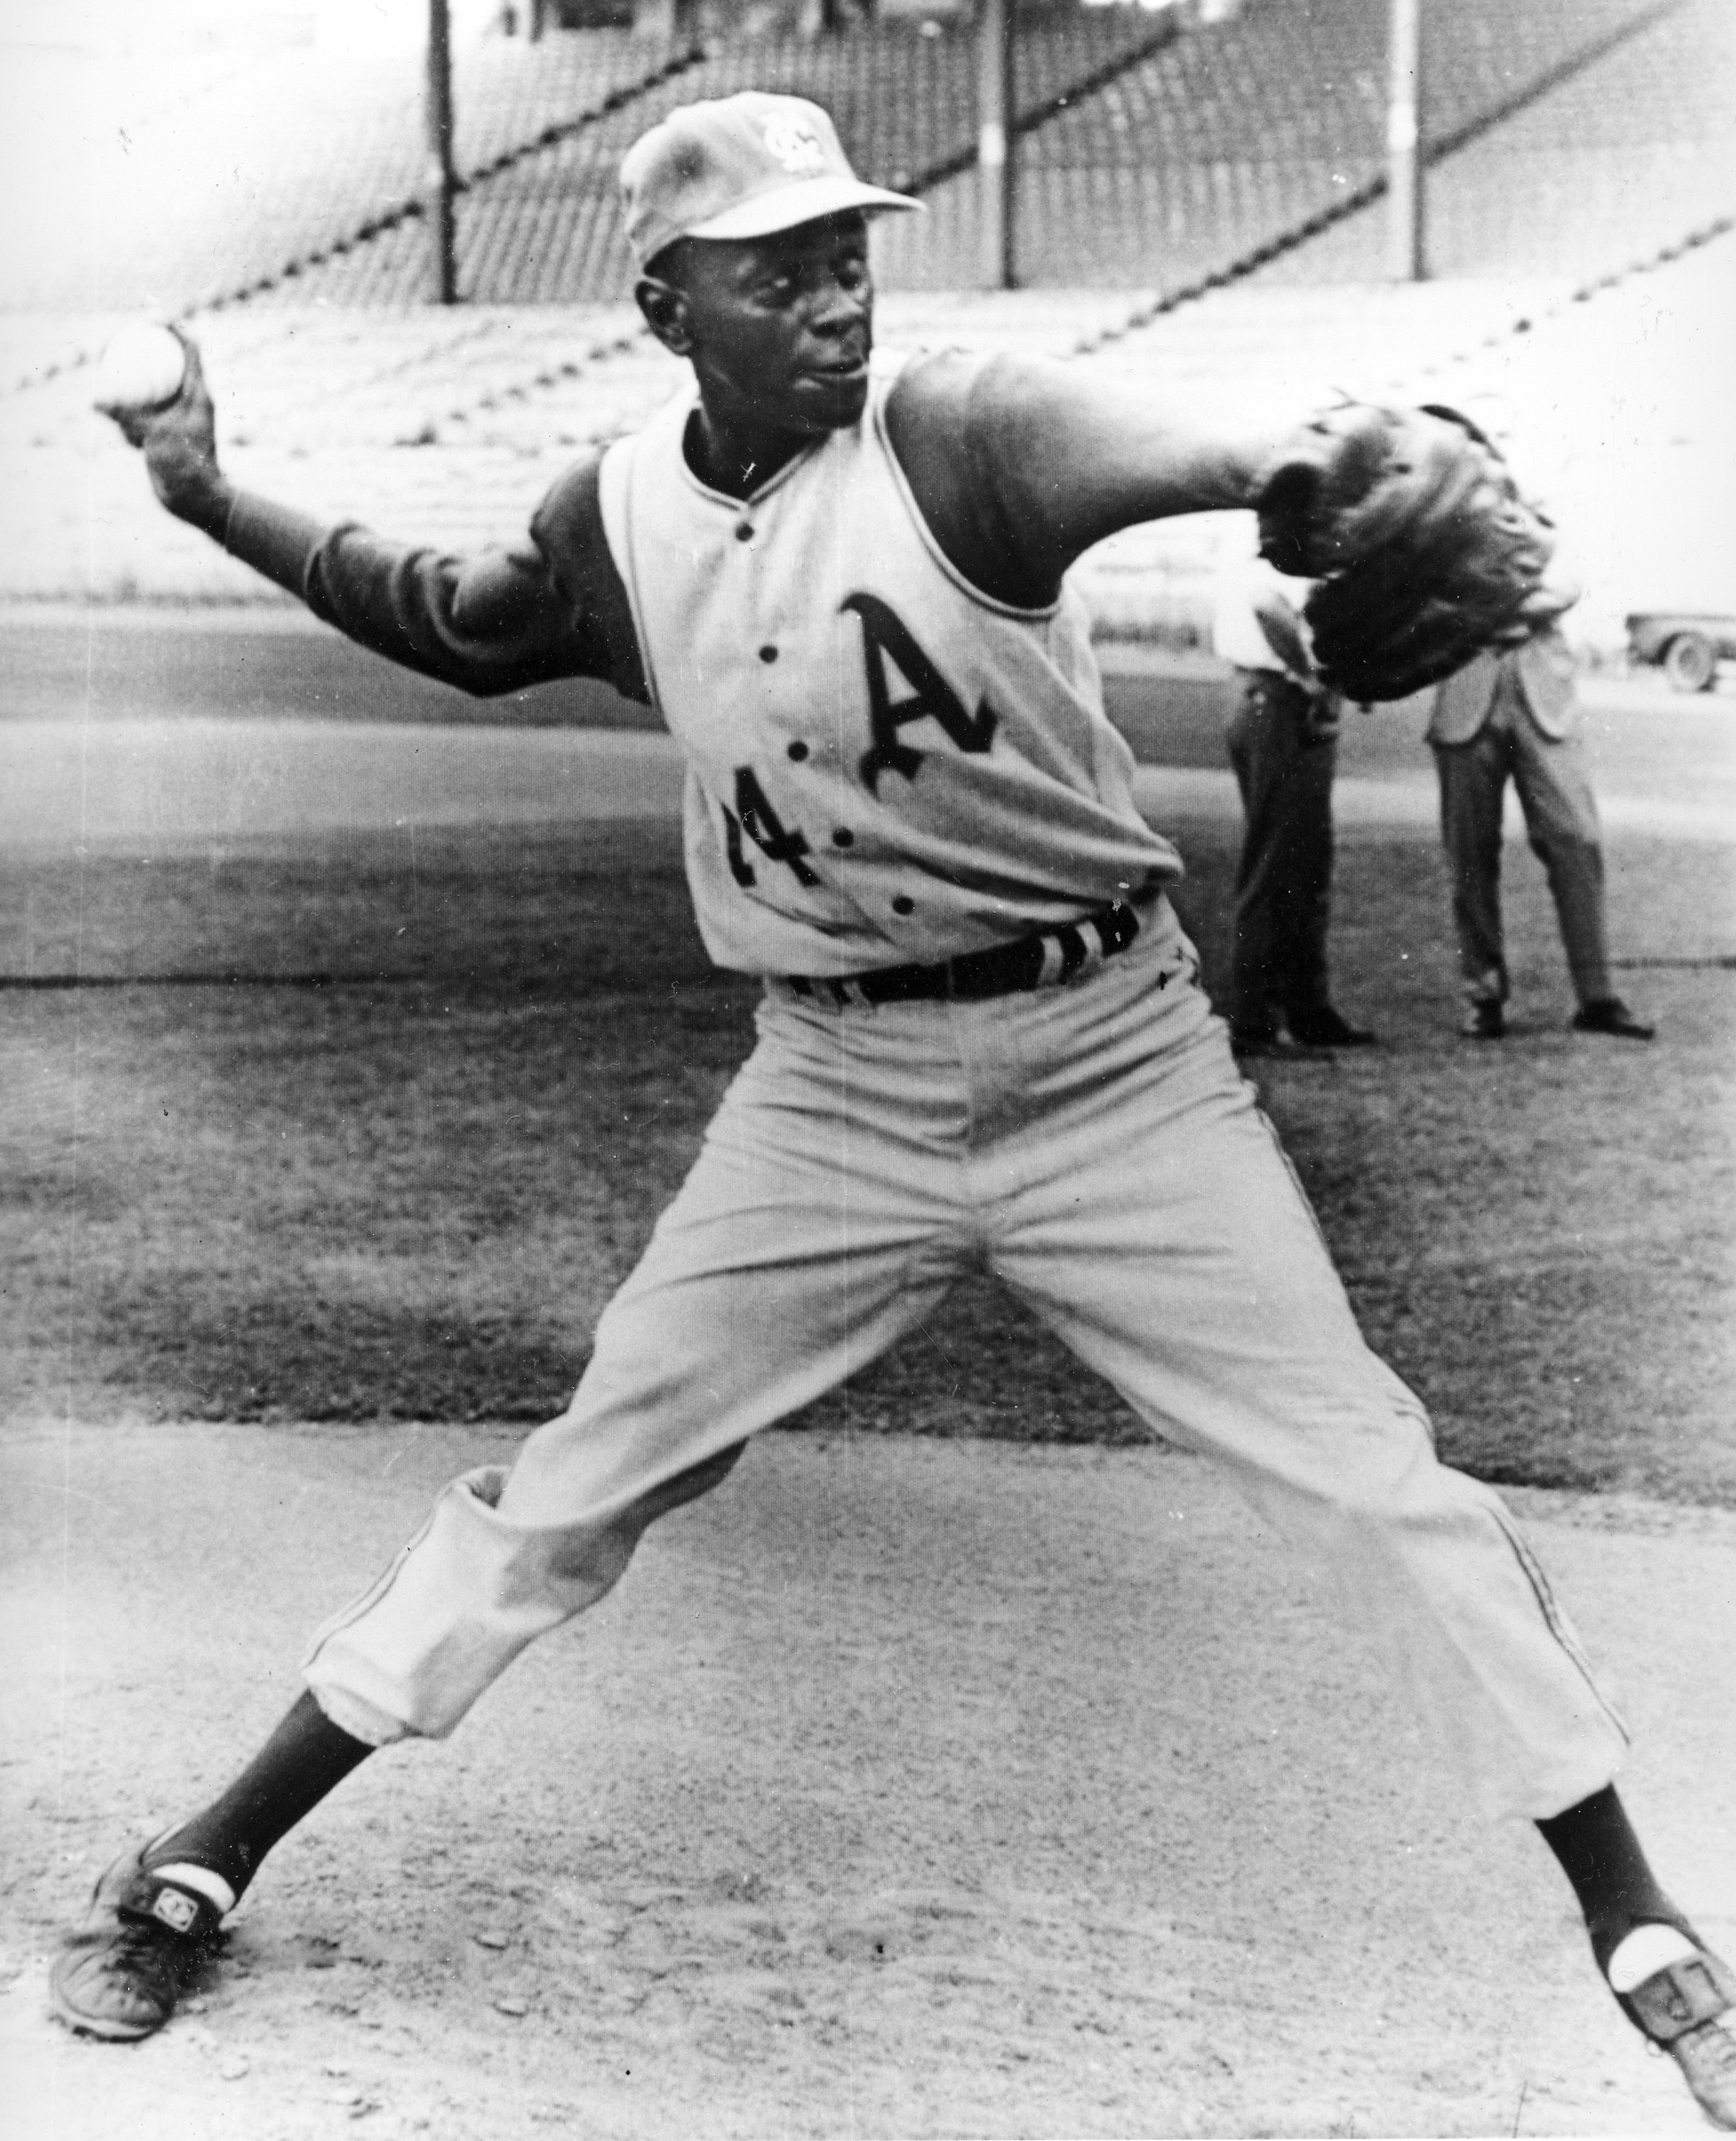 Satchel Paige (14), pitcher for the Kansas City Athletics, is shown during workout at the ball park in Kansas City, Mo. on Sept. 13, 1965. The Athletics were Paige's last MLB team during his career as a player.